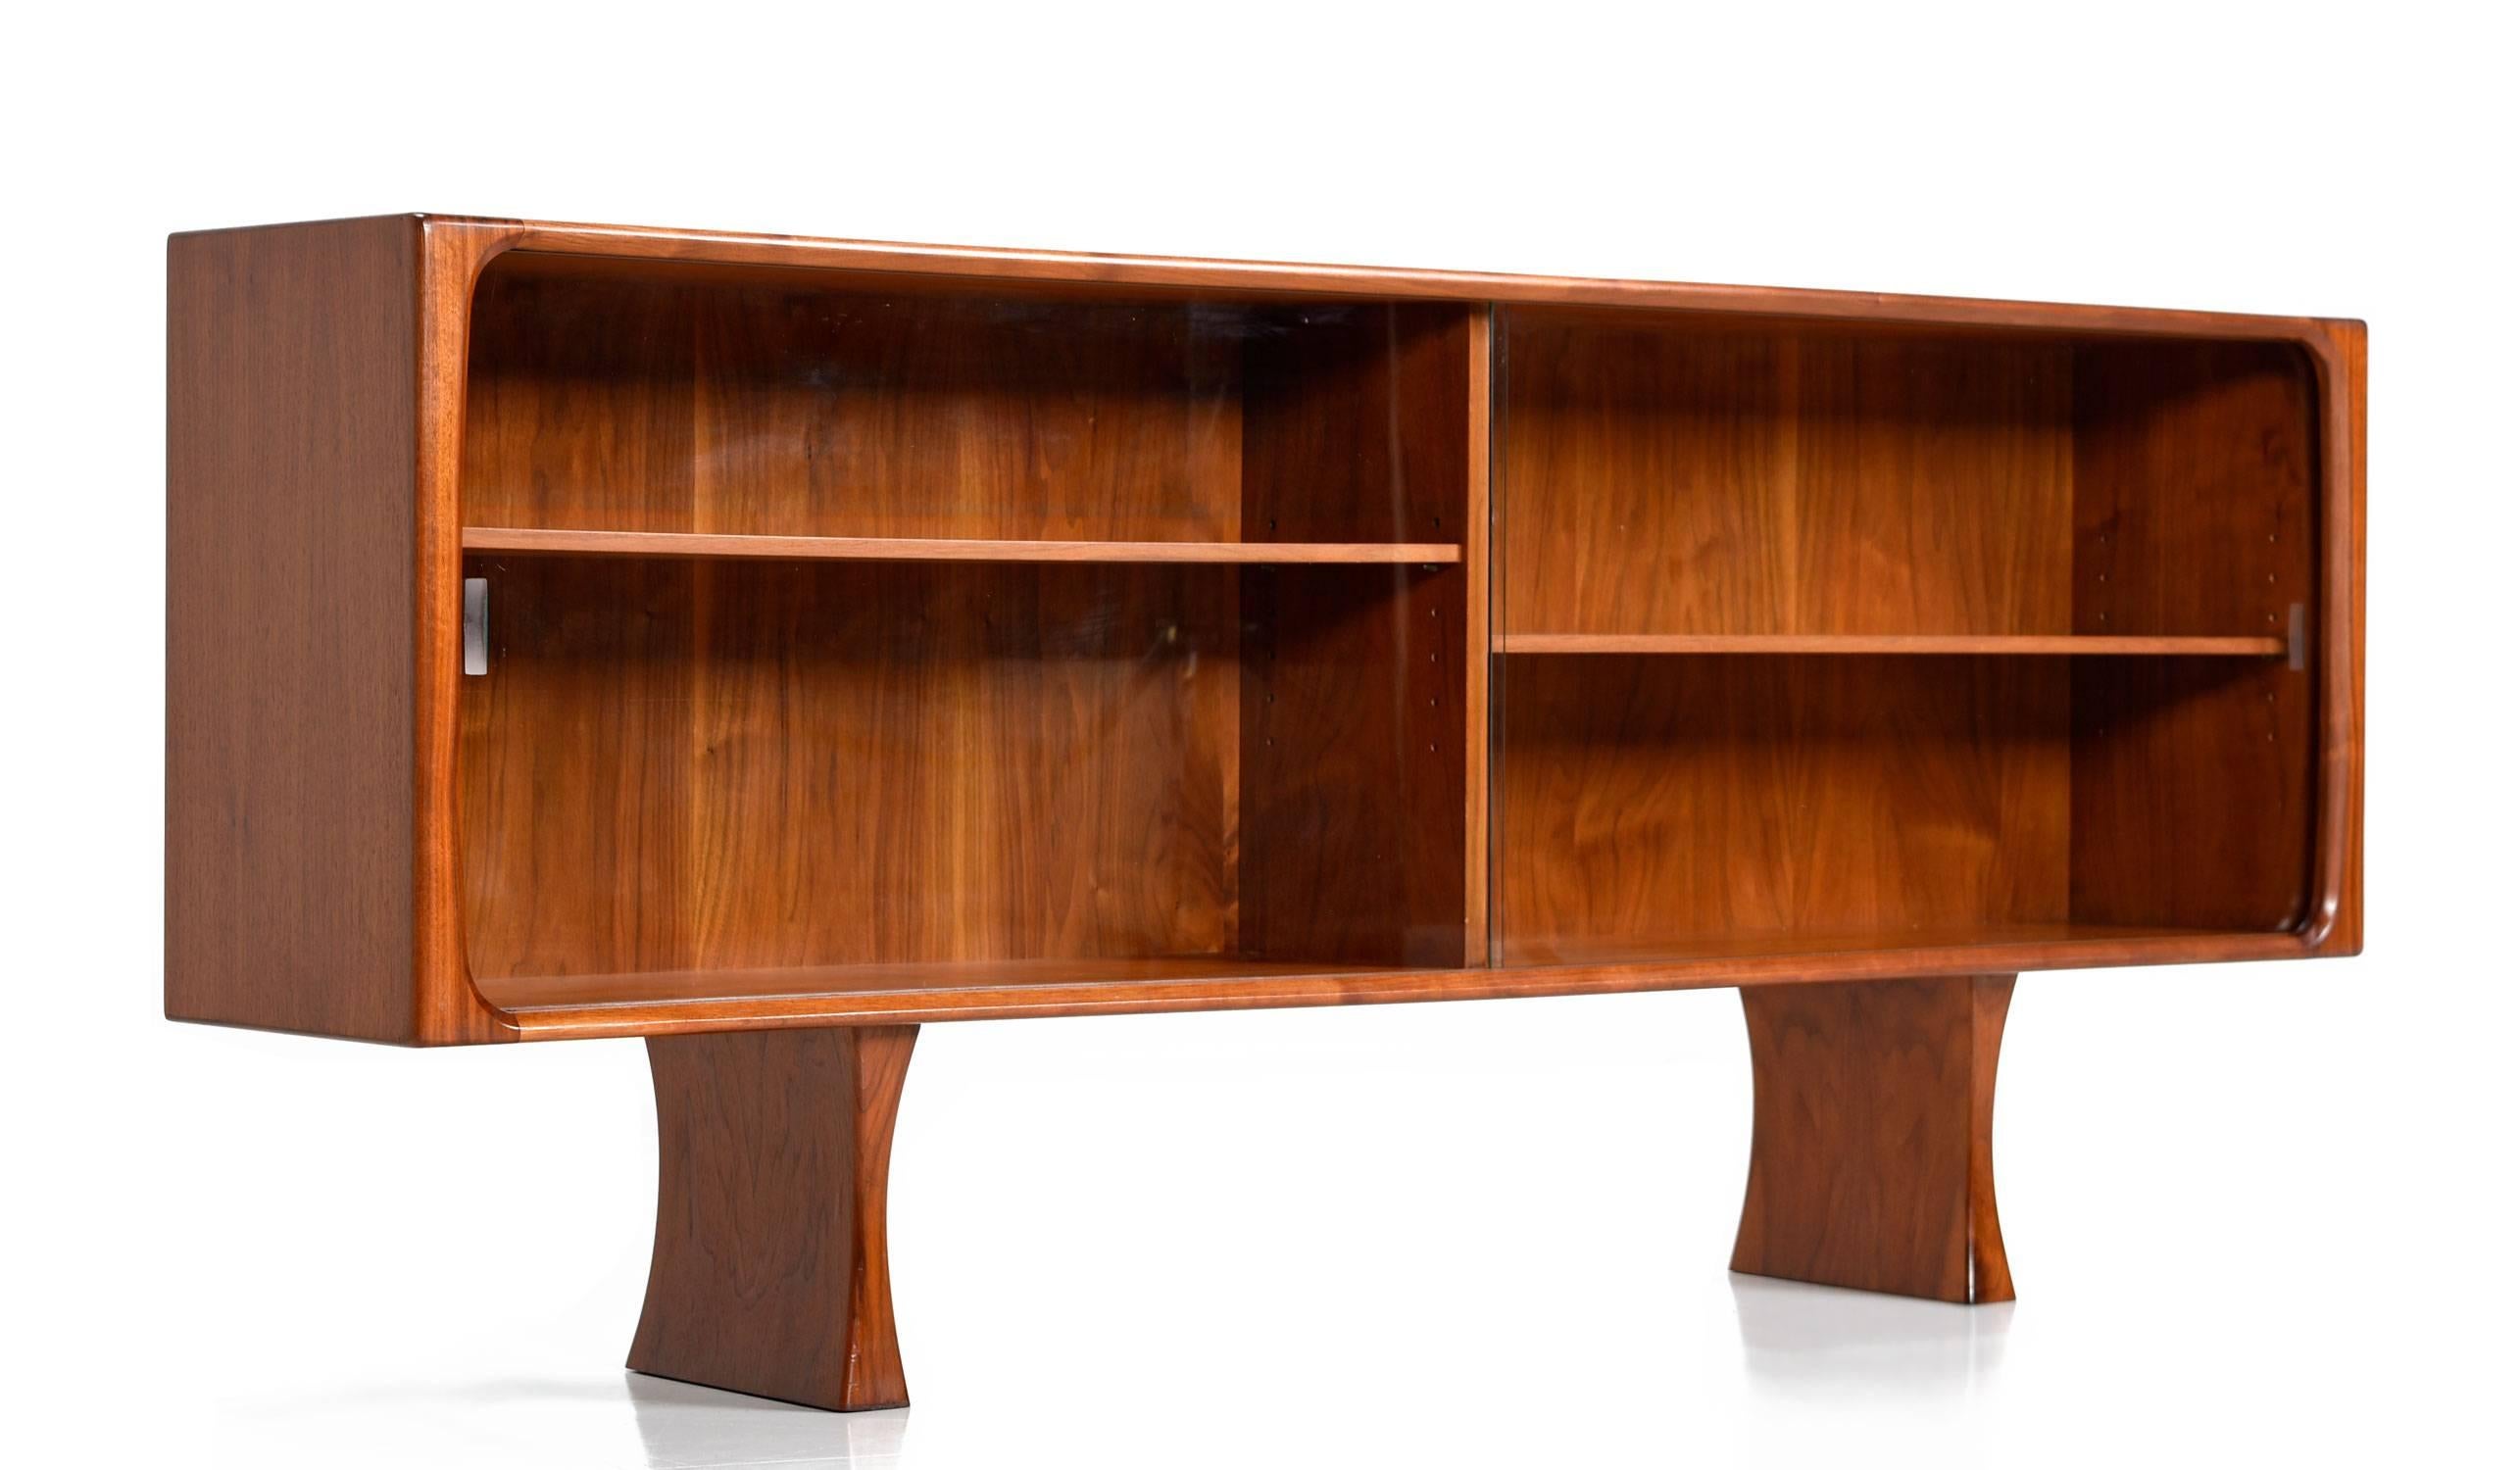 Mid-Century Modern low profile Danish teak bookcase by Bernhard Pedersen & Son. Exceptional quality construction. Elegantly contoured solid teak banding enhances the perimeters. Two bay design with a single adjustable height shelf on each side.